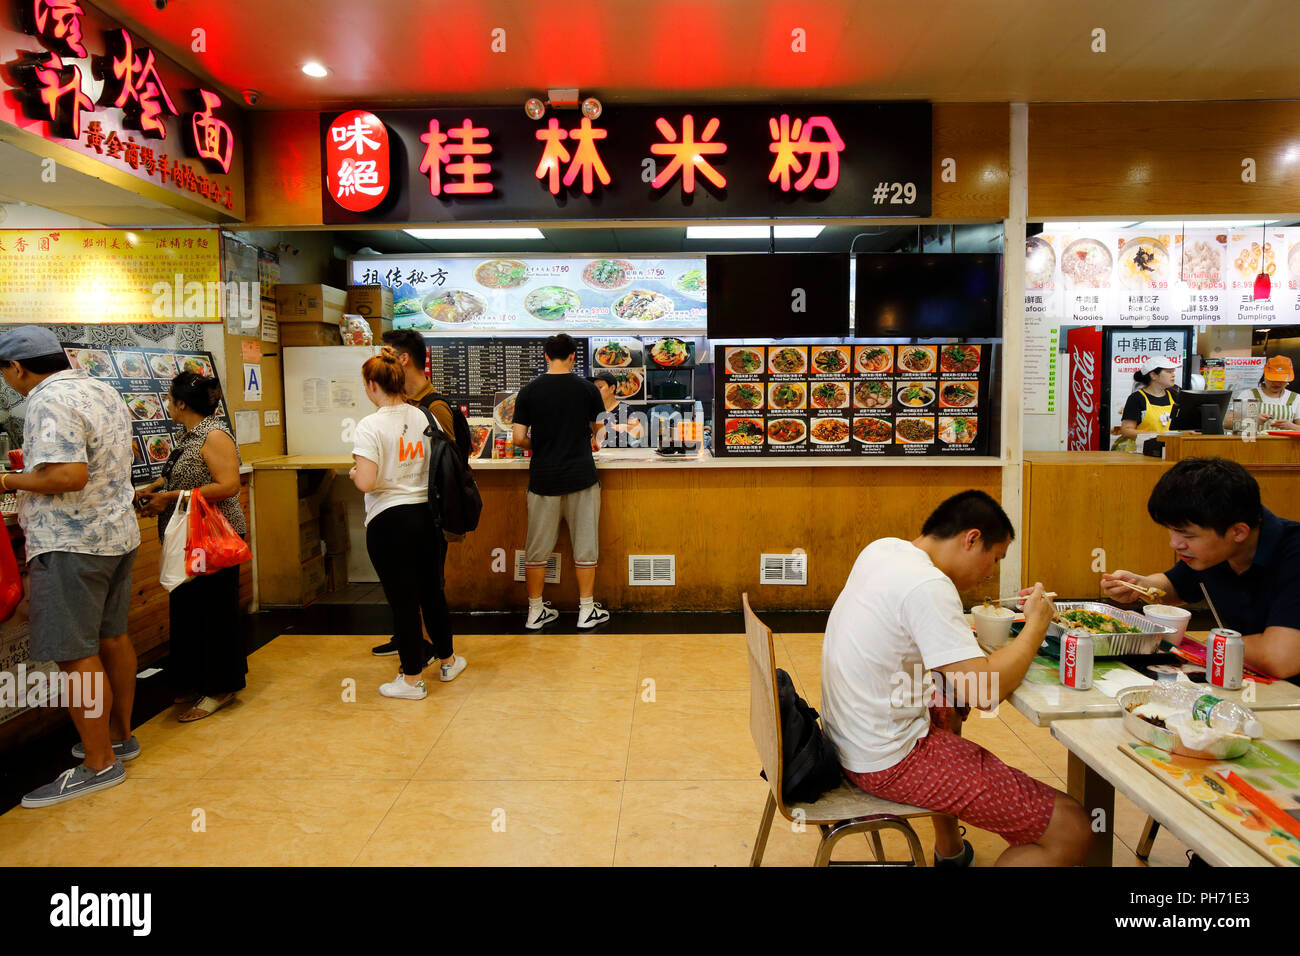 Food vendors inside the New World Mall food court in Downtown Flushing Chinatown, Queens, New York. 法拉盛, 法拉盛華埠, 華裔美國人, 紐約 Stock Photo